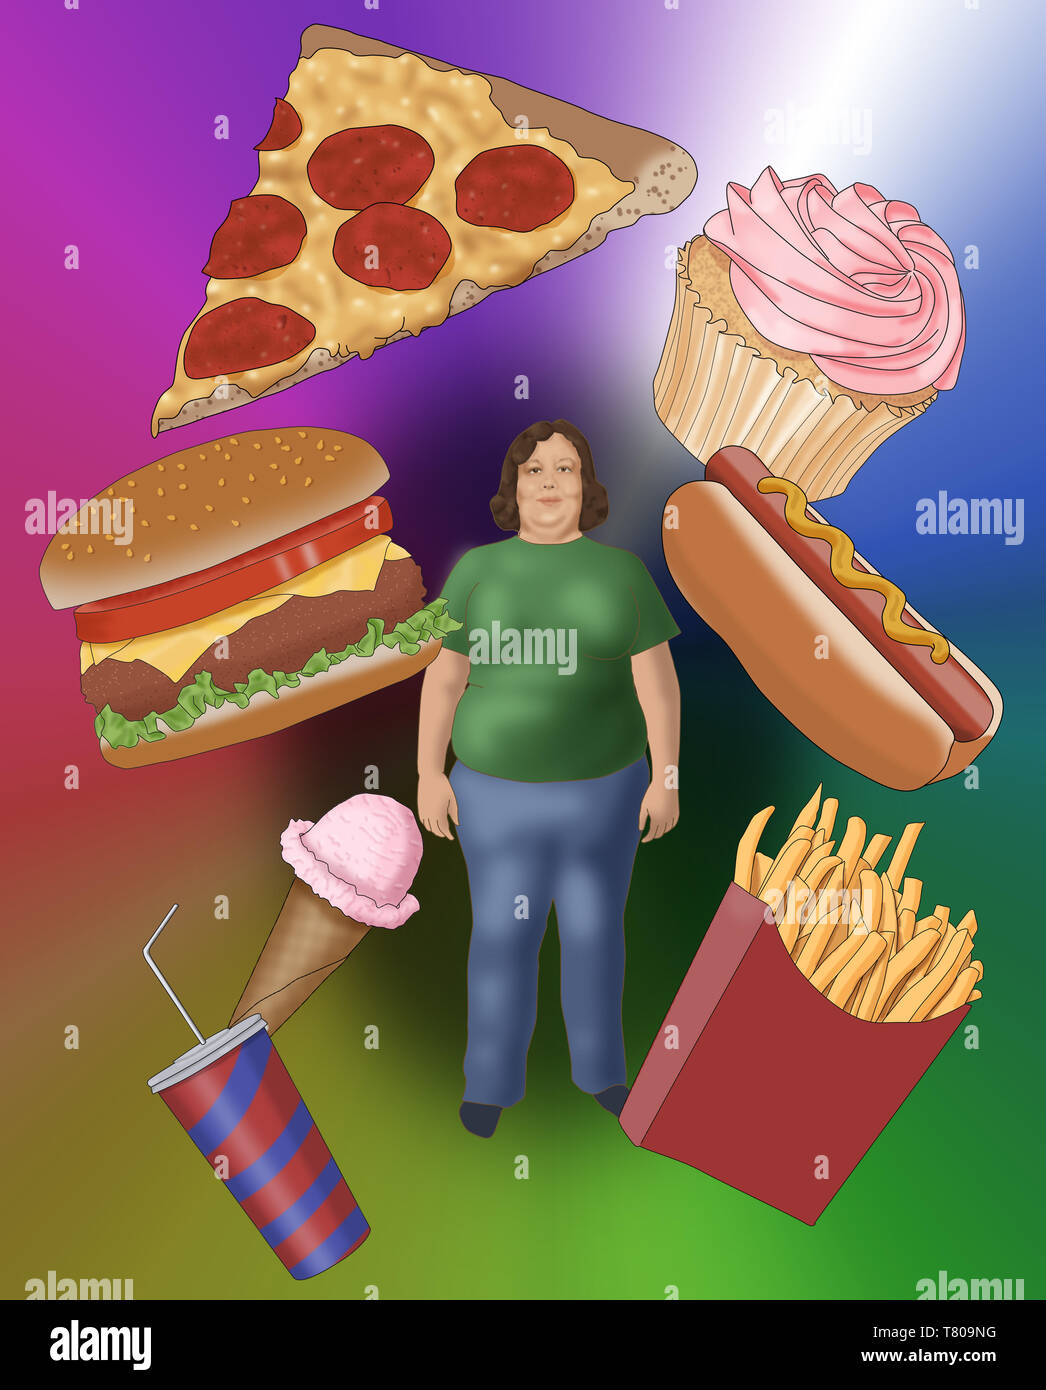 Obesity and Junk Food, Conceptual Illustration Stock Photo